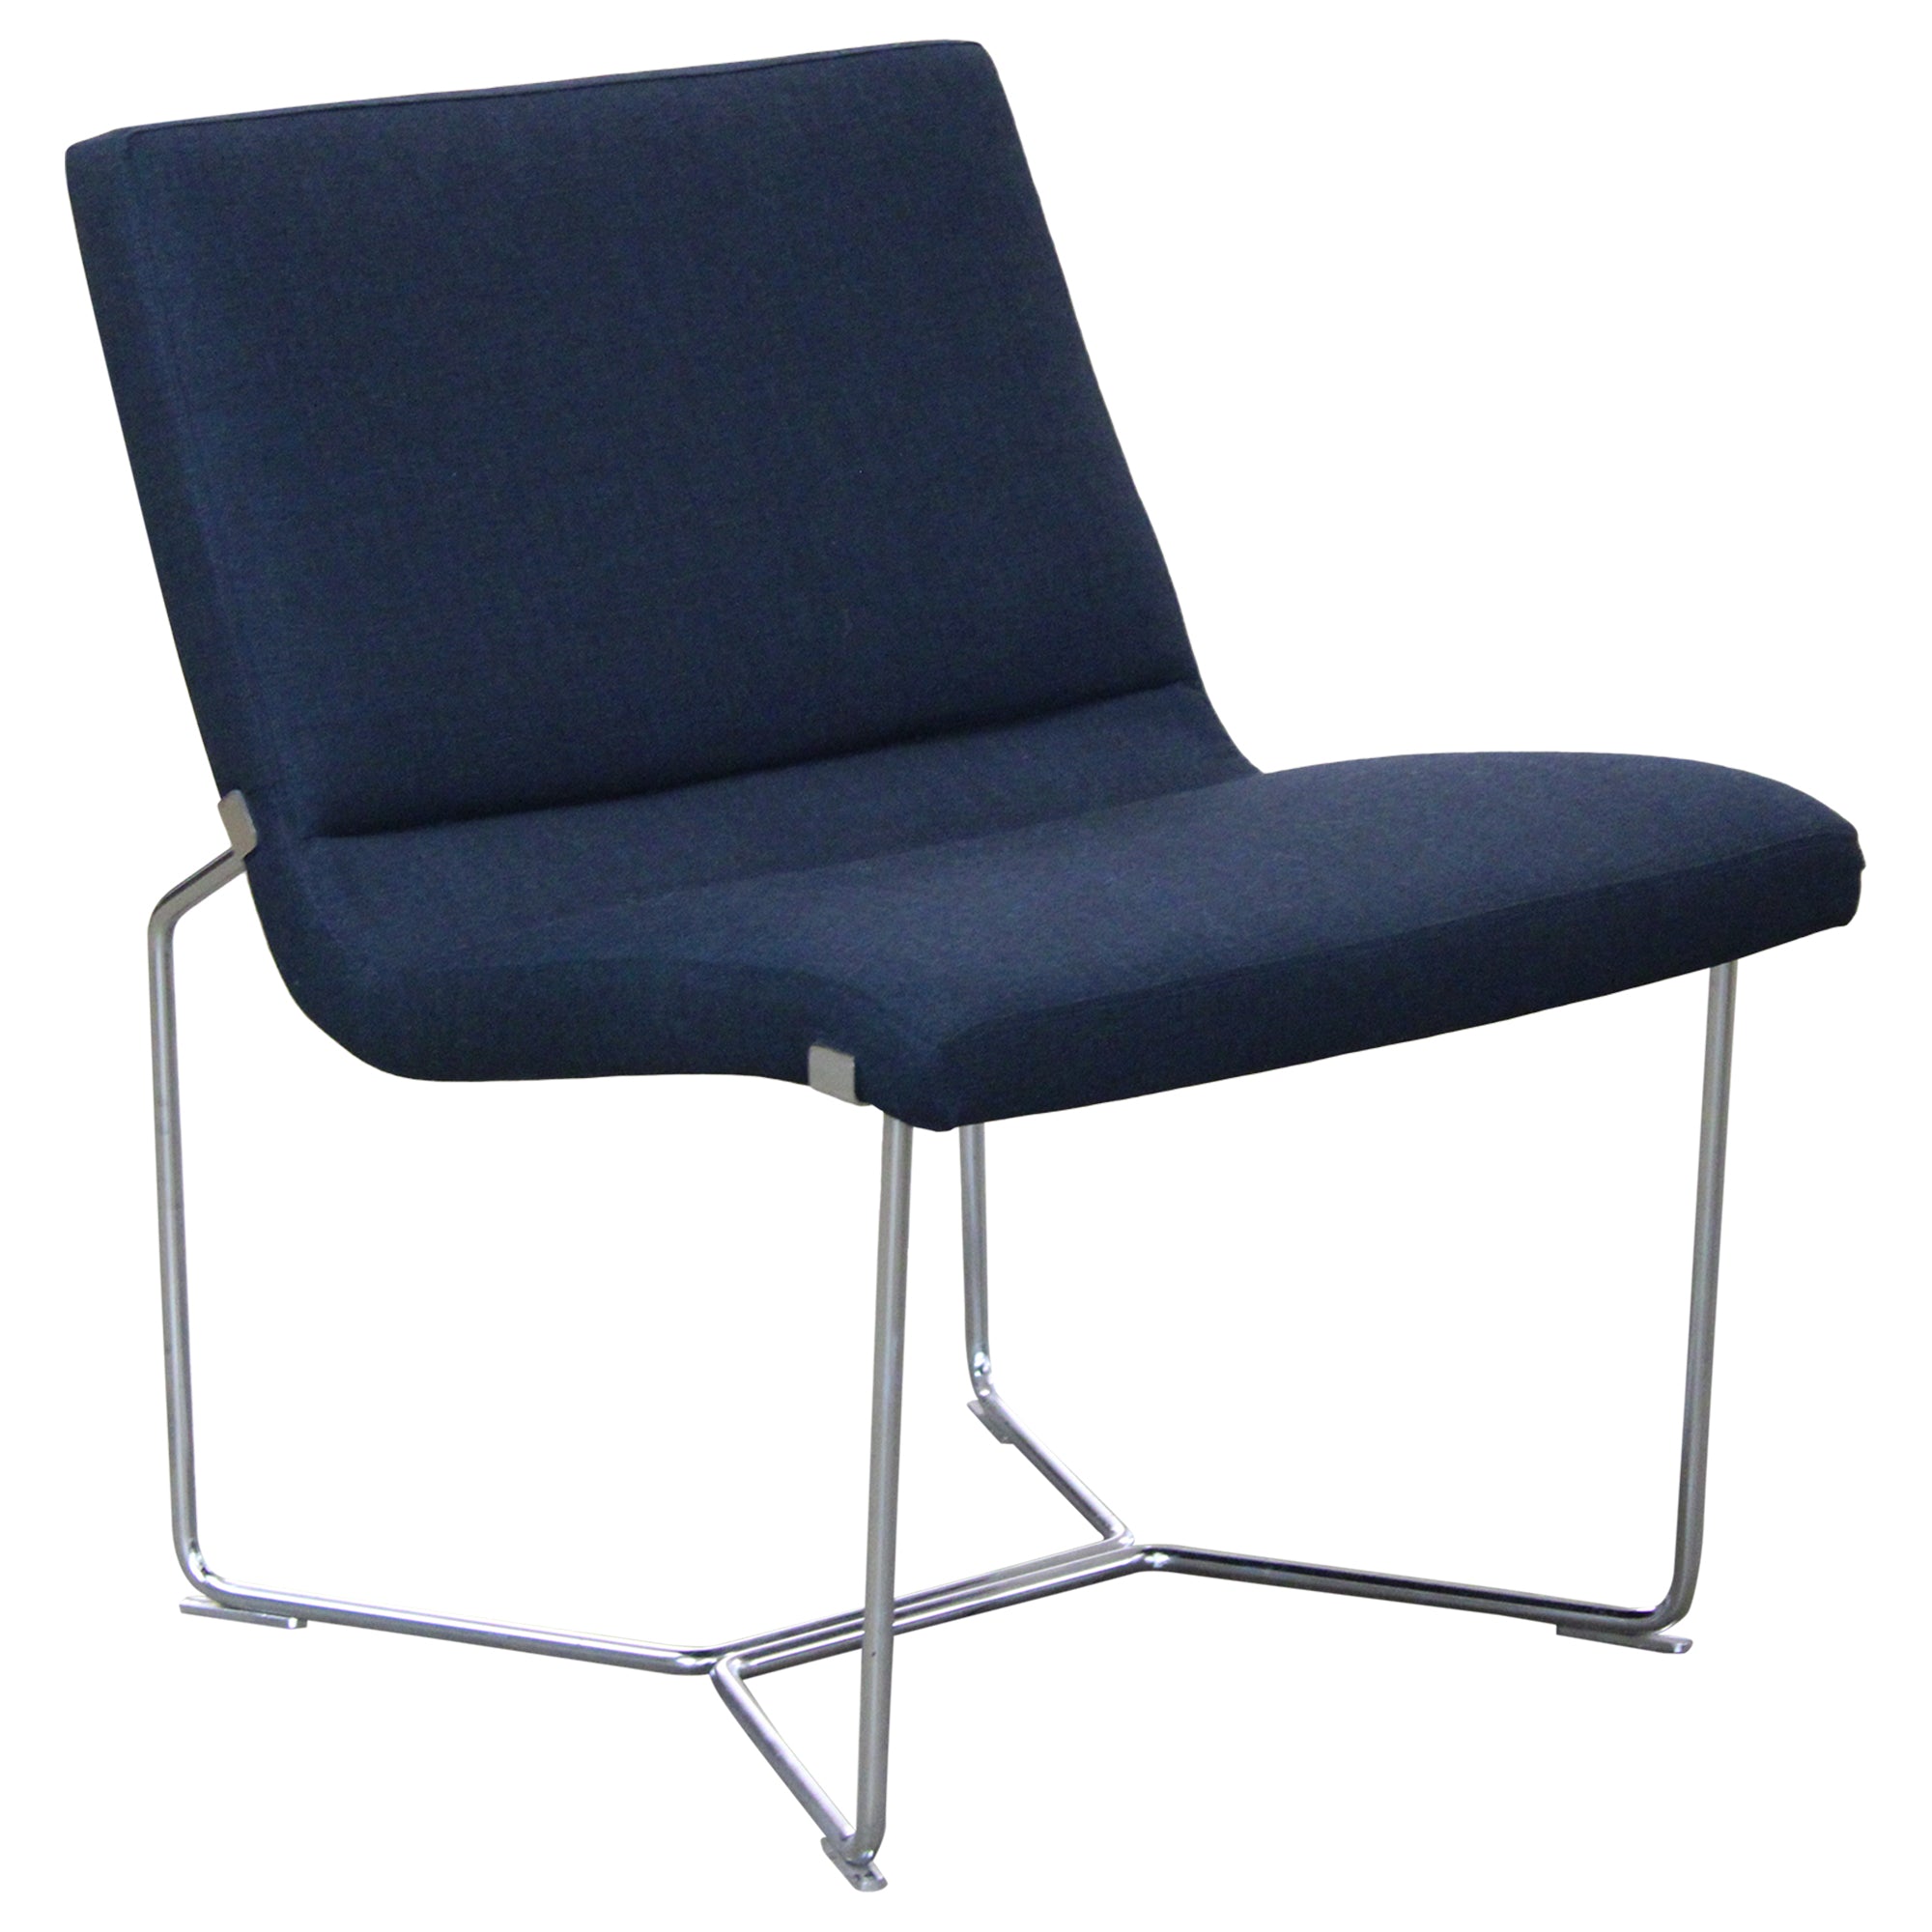 Harter Forum Lounge Chair, Navy - Preowned